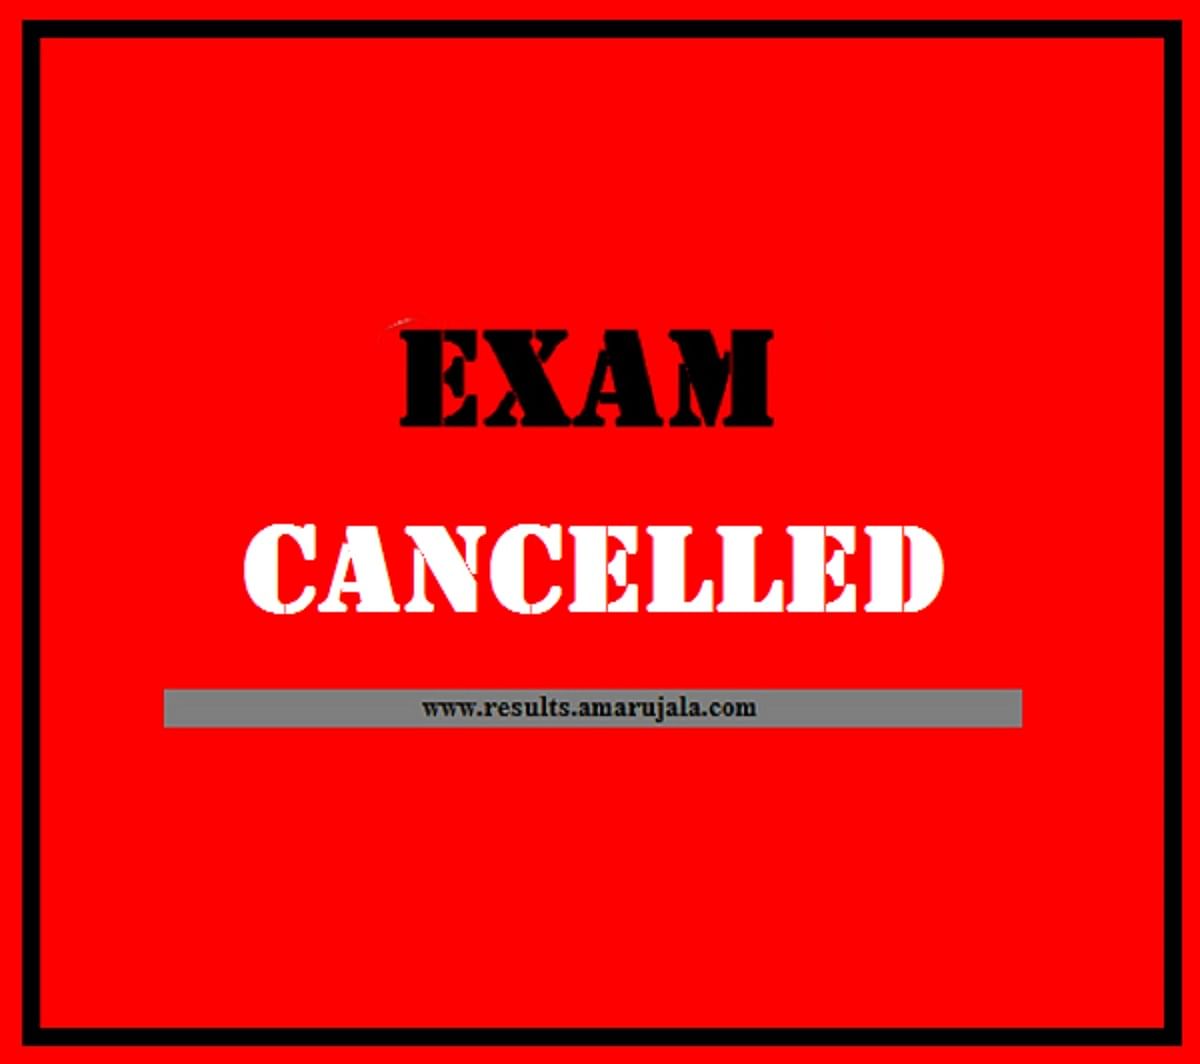 Odisha Board Class 12 Remaining Exams 2020 Cancelled, Details Here